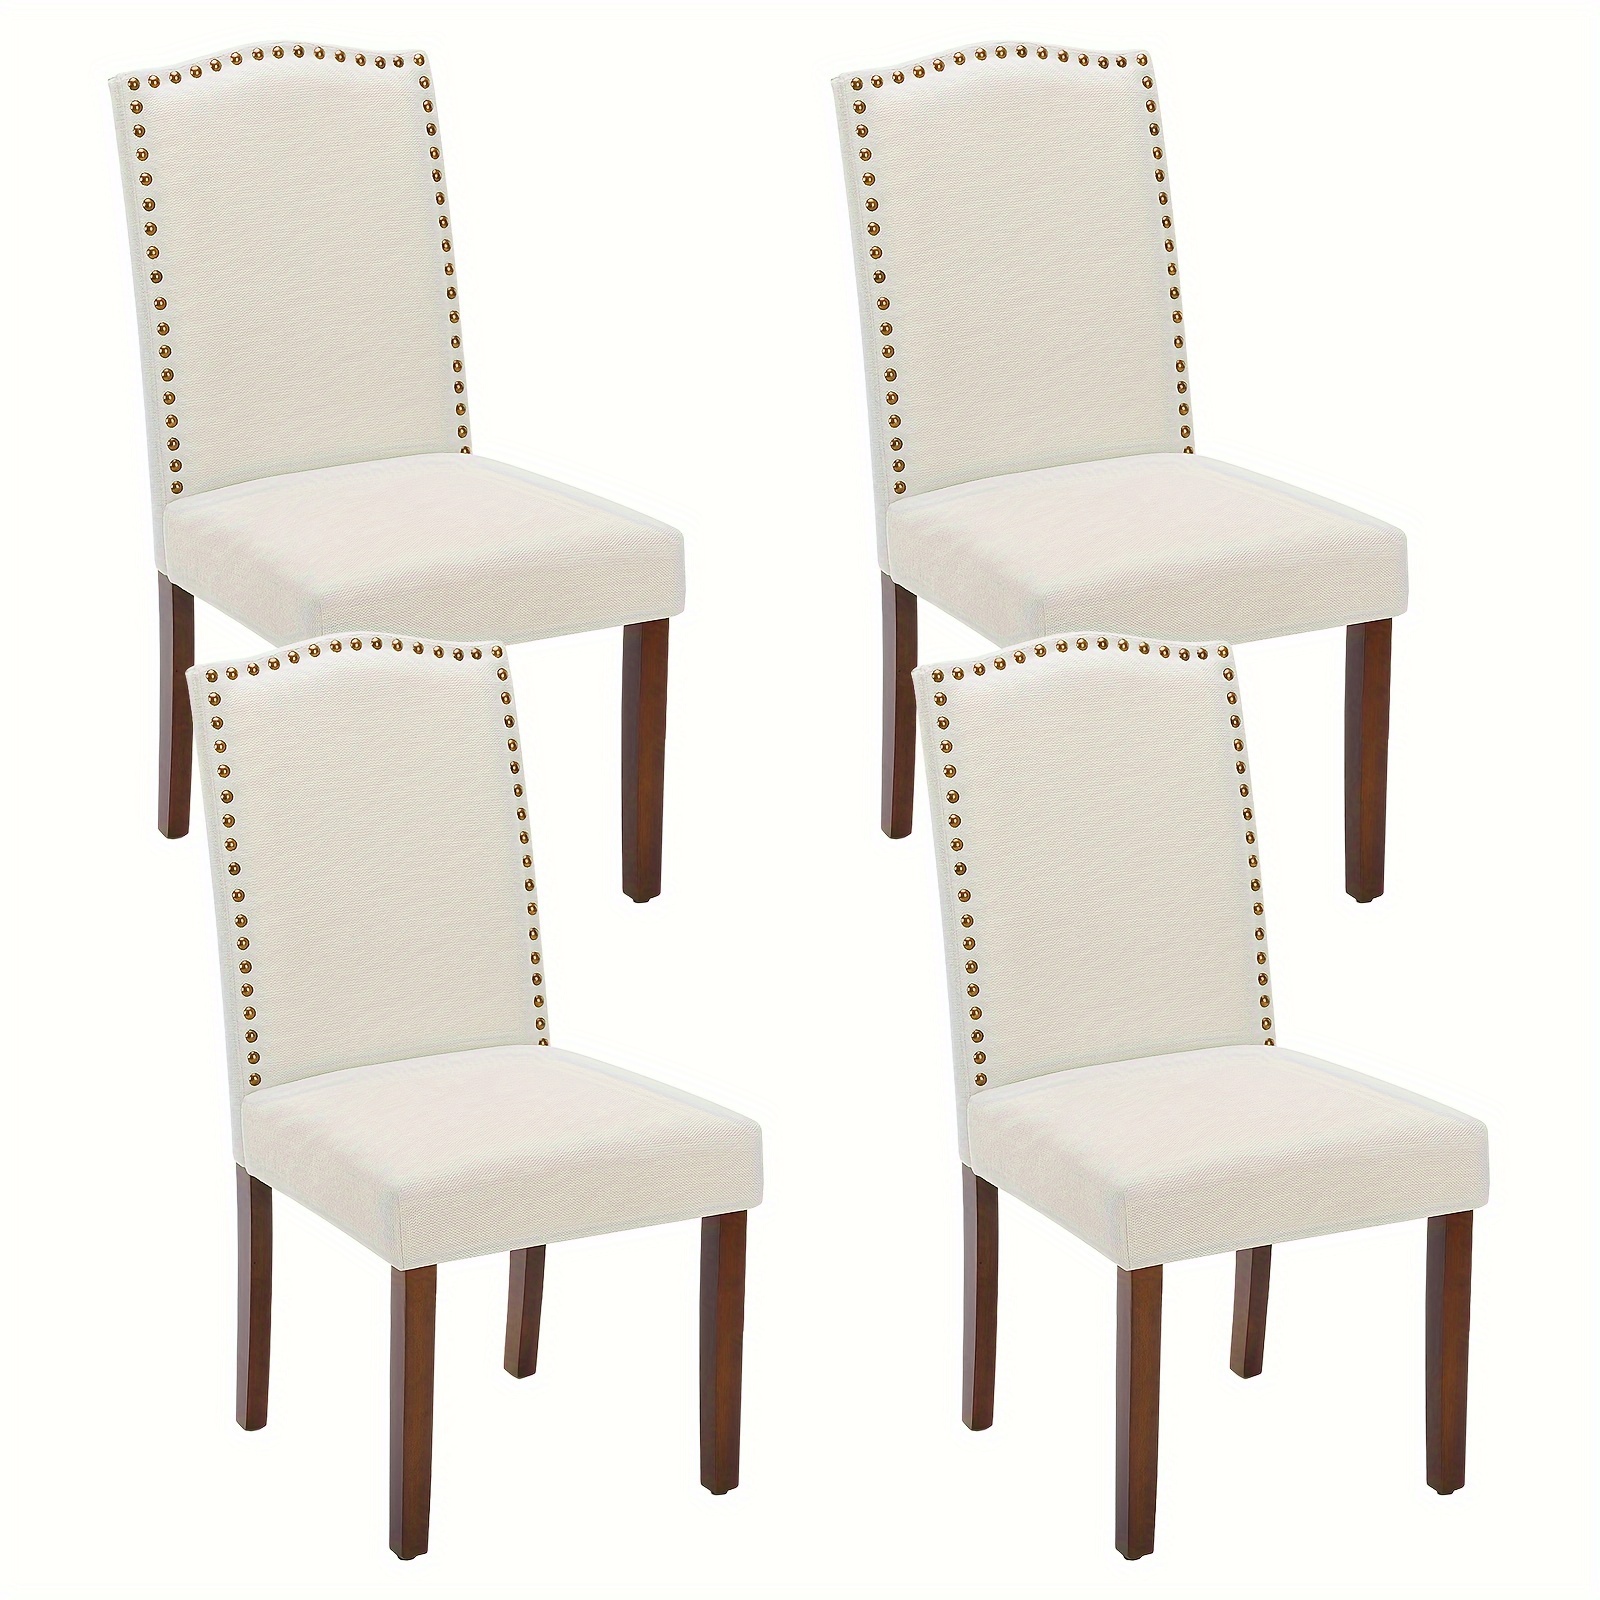 

Dining Chairs Set Of 4, Parsons Dining Chairs Upholstered Fabric Kitchen Side Chairs With Nailhead Trim And Wood Legs For Kitchen Dining Room Living Room